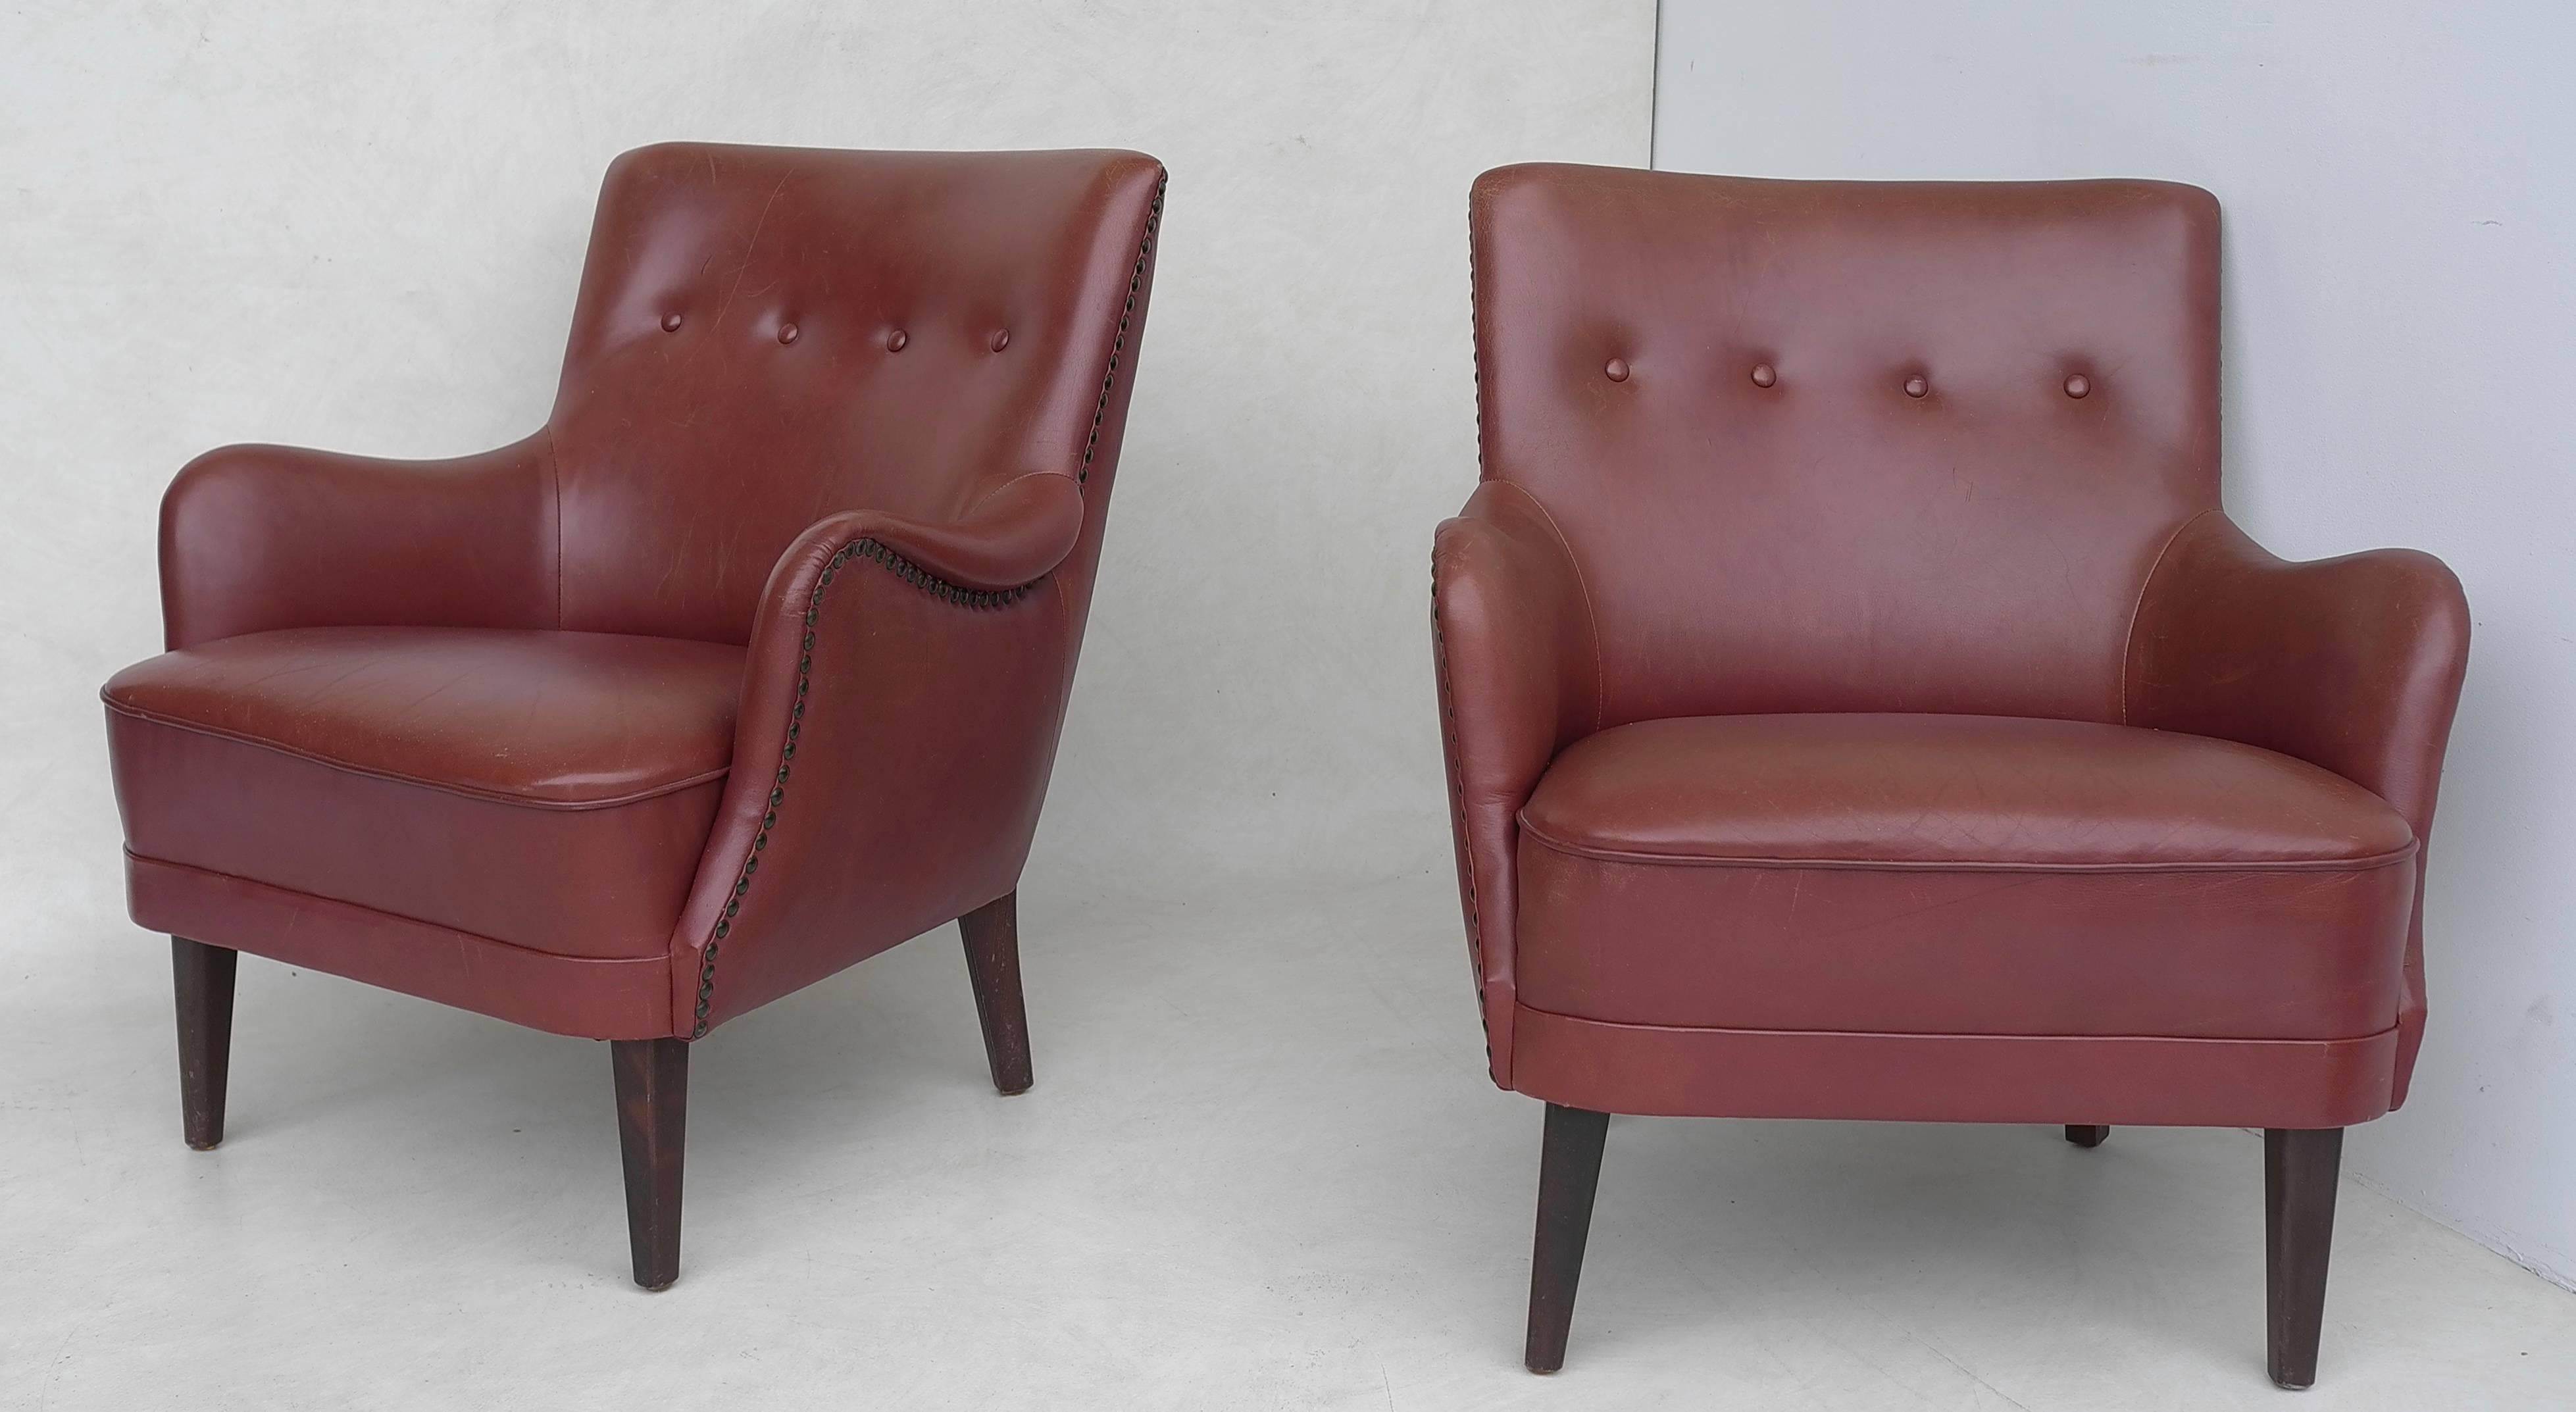 Pair of Danish Armchairs with Footstool in Chestnut Leather 1